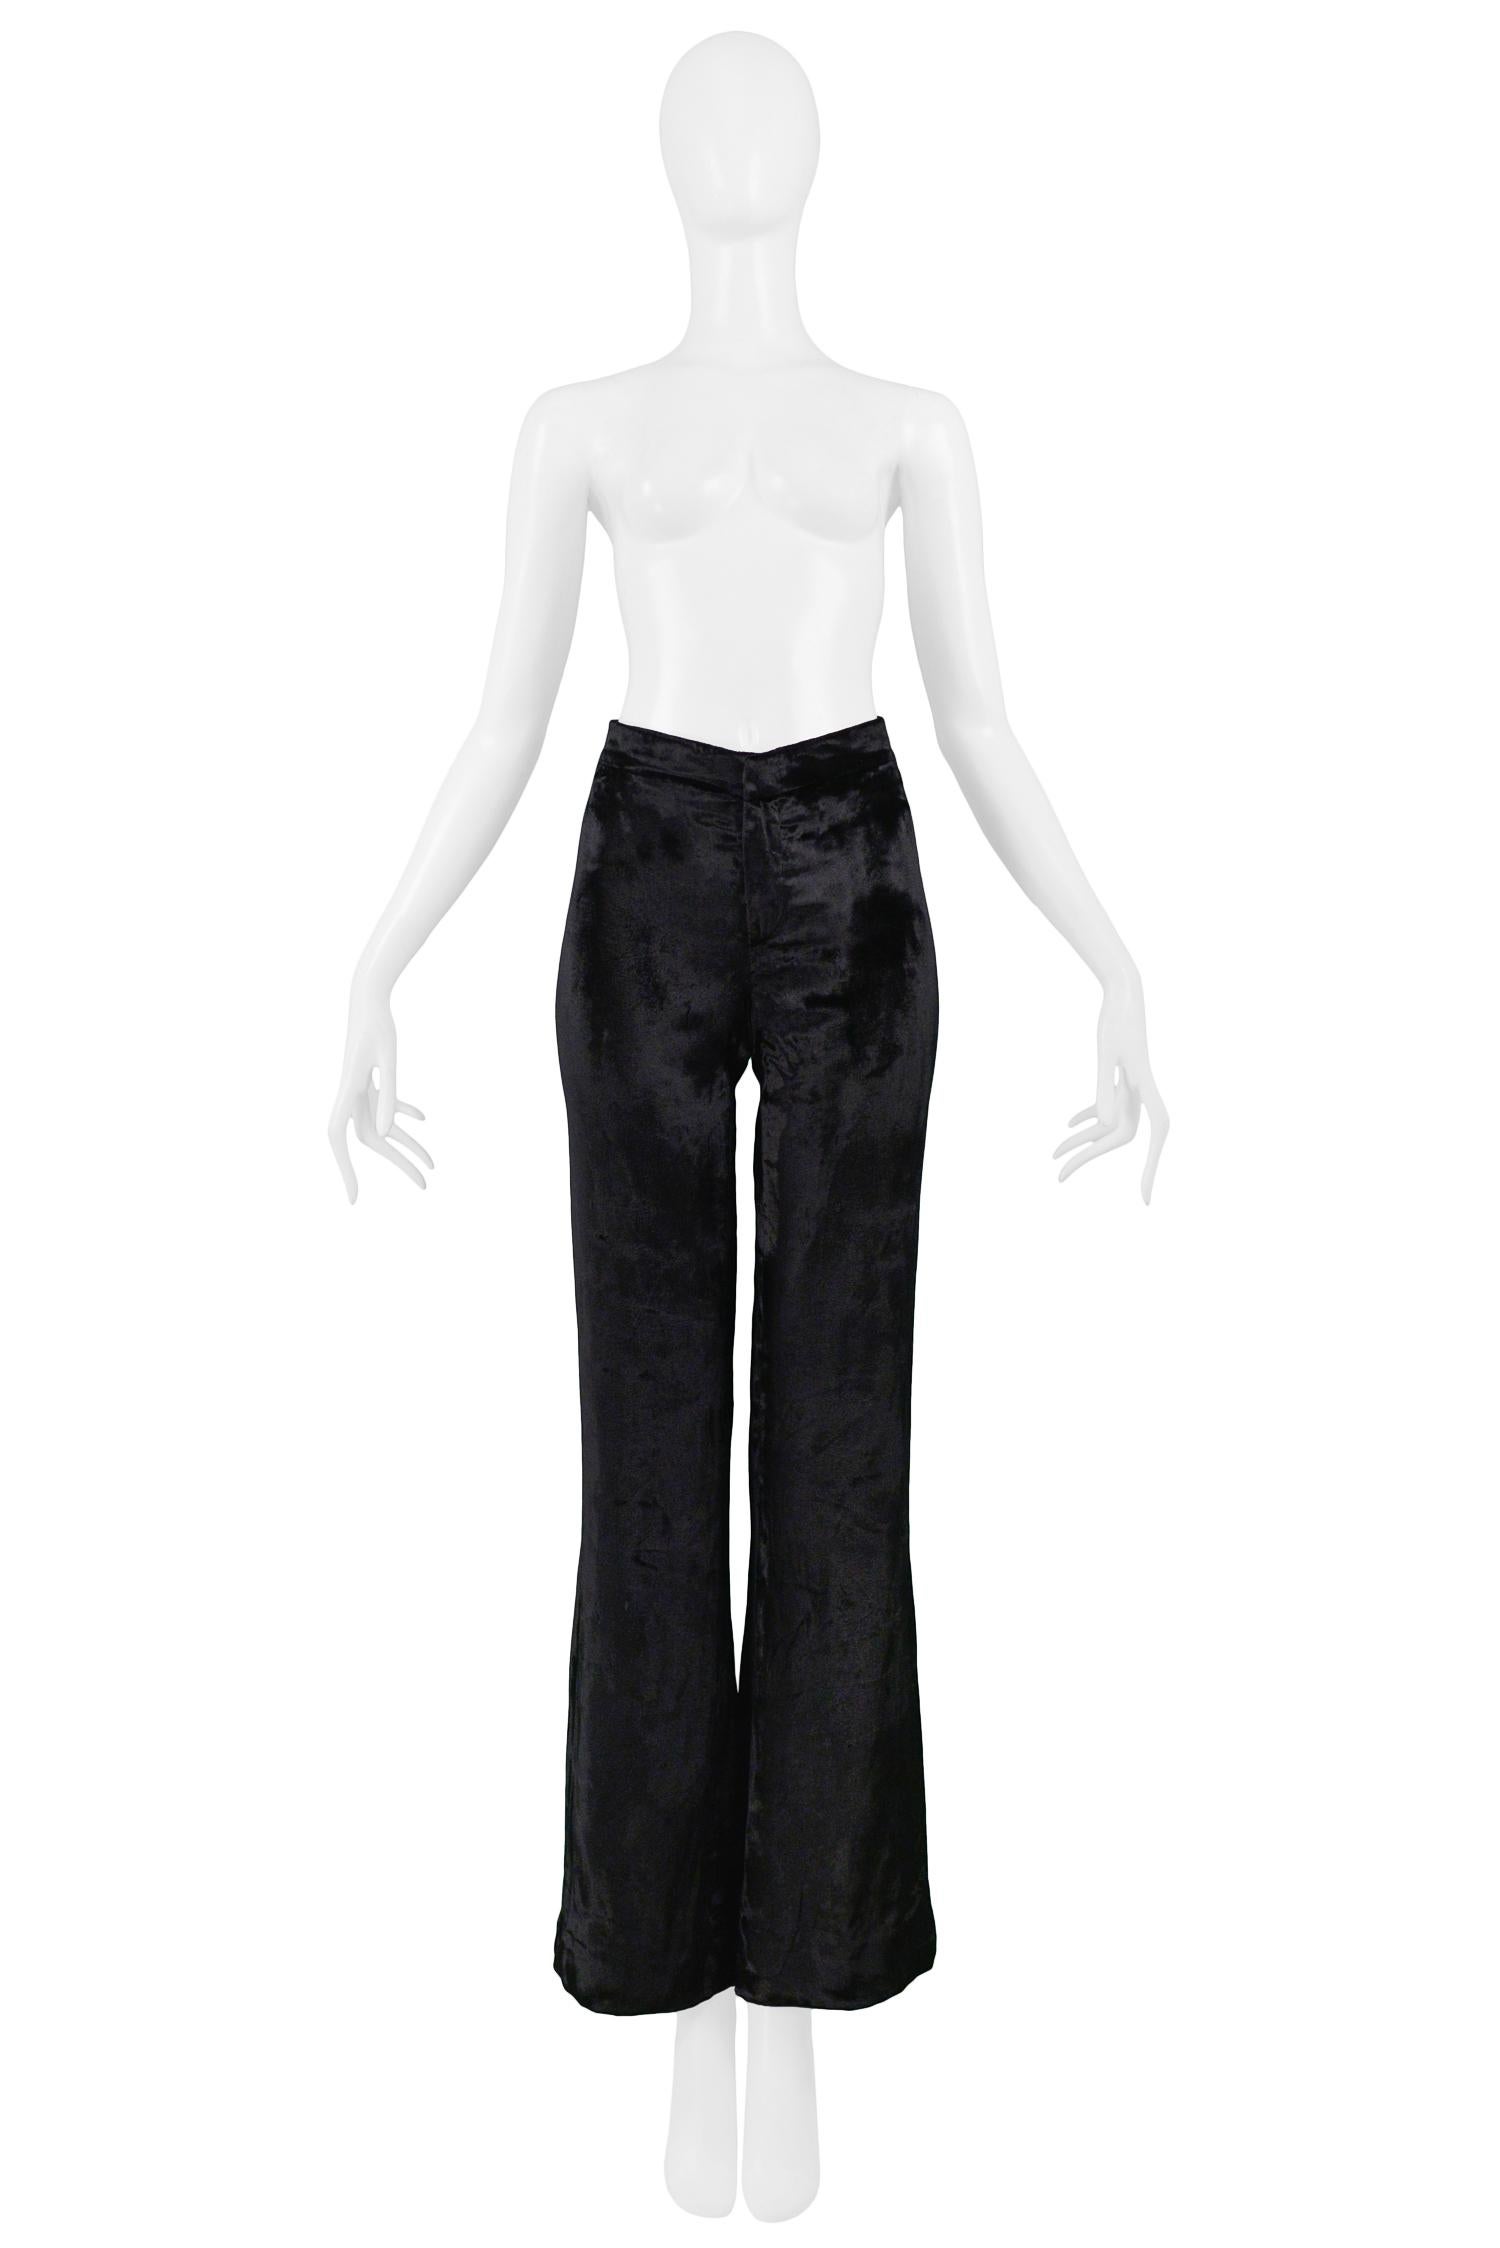 Resurrection Vintage is excited to offer this stunning pair of vintage black Tom Ford for Gucci velvet flare pants with a high waist, center front zipper, and smooth back.

Gucci
Designed by Tom Ford
Size 38
Velvet
Excellent Vintage